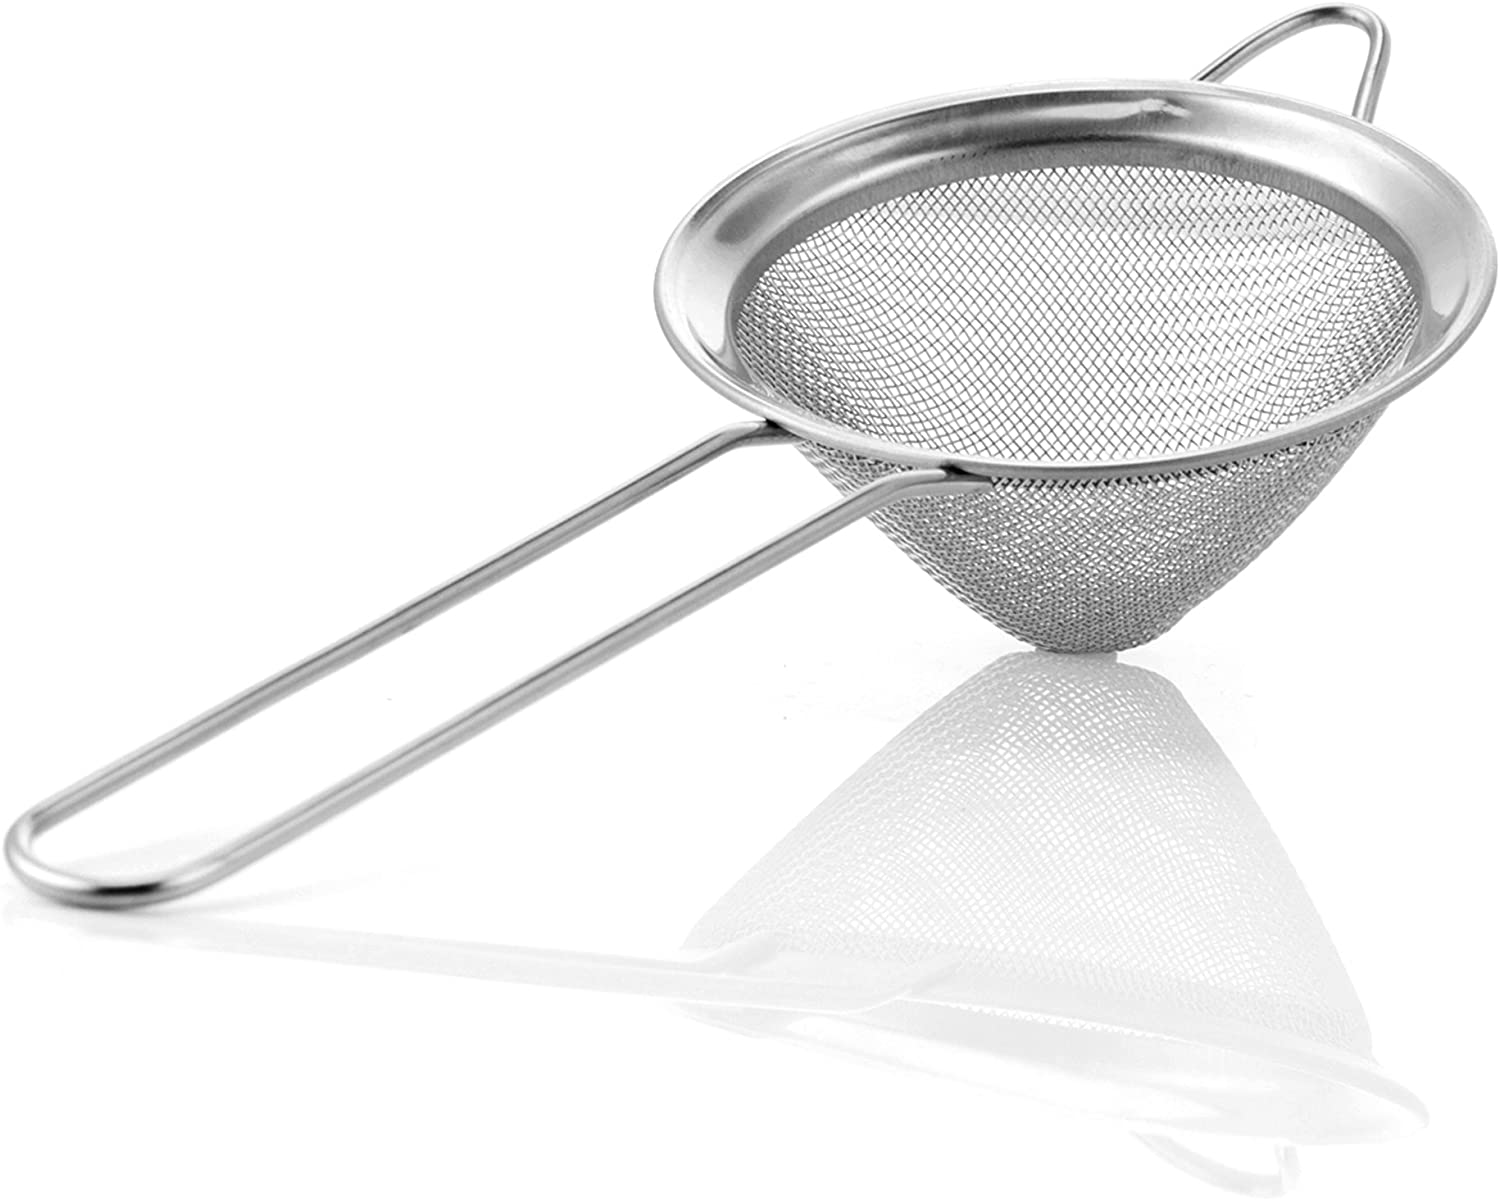 Homestia Stainless Fine Mesh Cooking Sieve Strainer Cooking Sieve And Sieve Set 